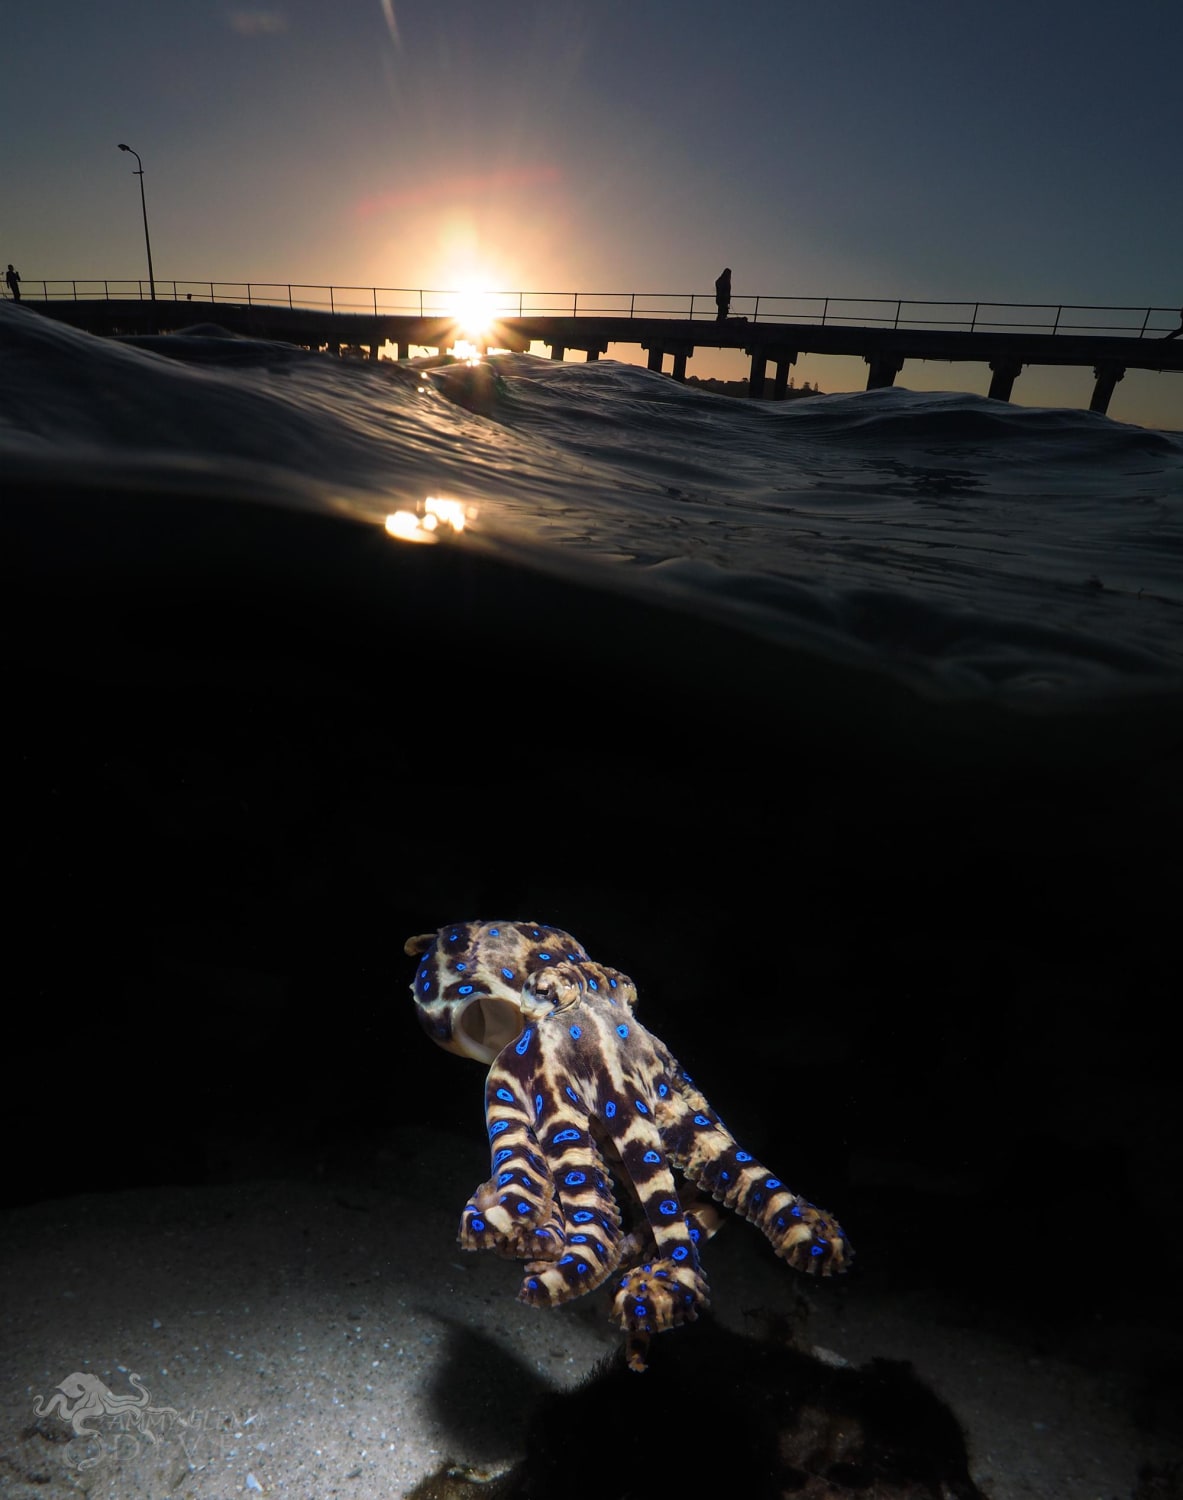 One of my favorite double exposure photos of a Blue Ringed Octopus. People walk this pier every day that would never know of their existance just meters below their feet.